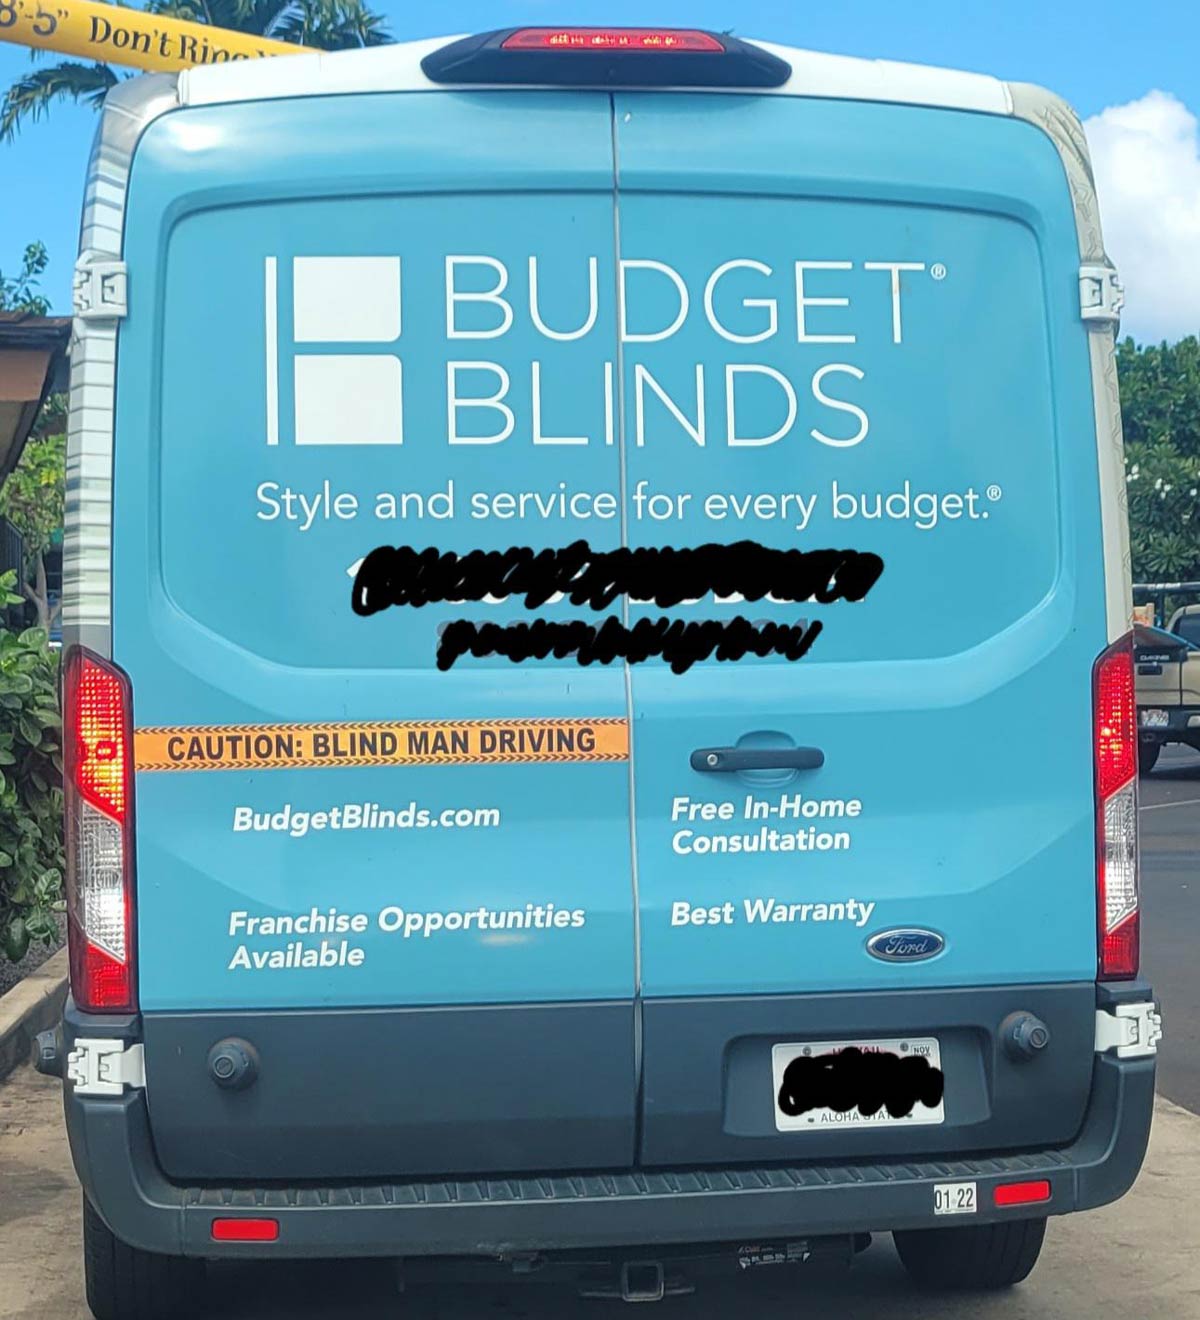 commercial vehicle - 35 Don't Rine Budget Blinds Style and service for every budget. Caution Blind Man Driving O BudgetBlinds.com Free InHome Consultation Best Warranty Franchise Opportunities Available Ford Noy Alohala 01 22